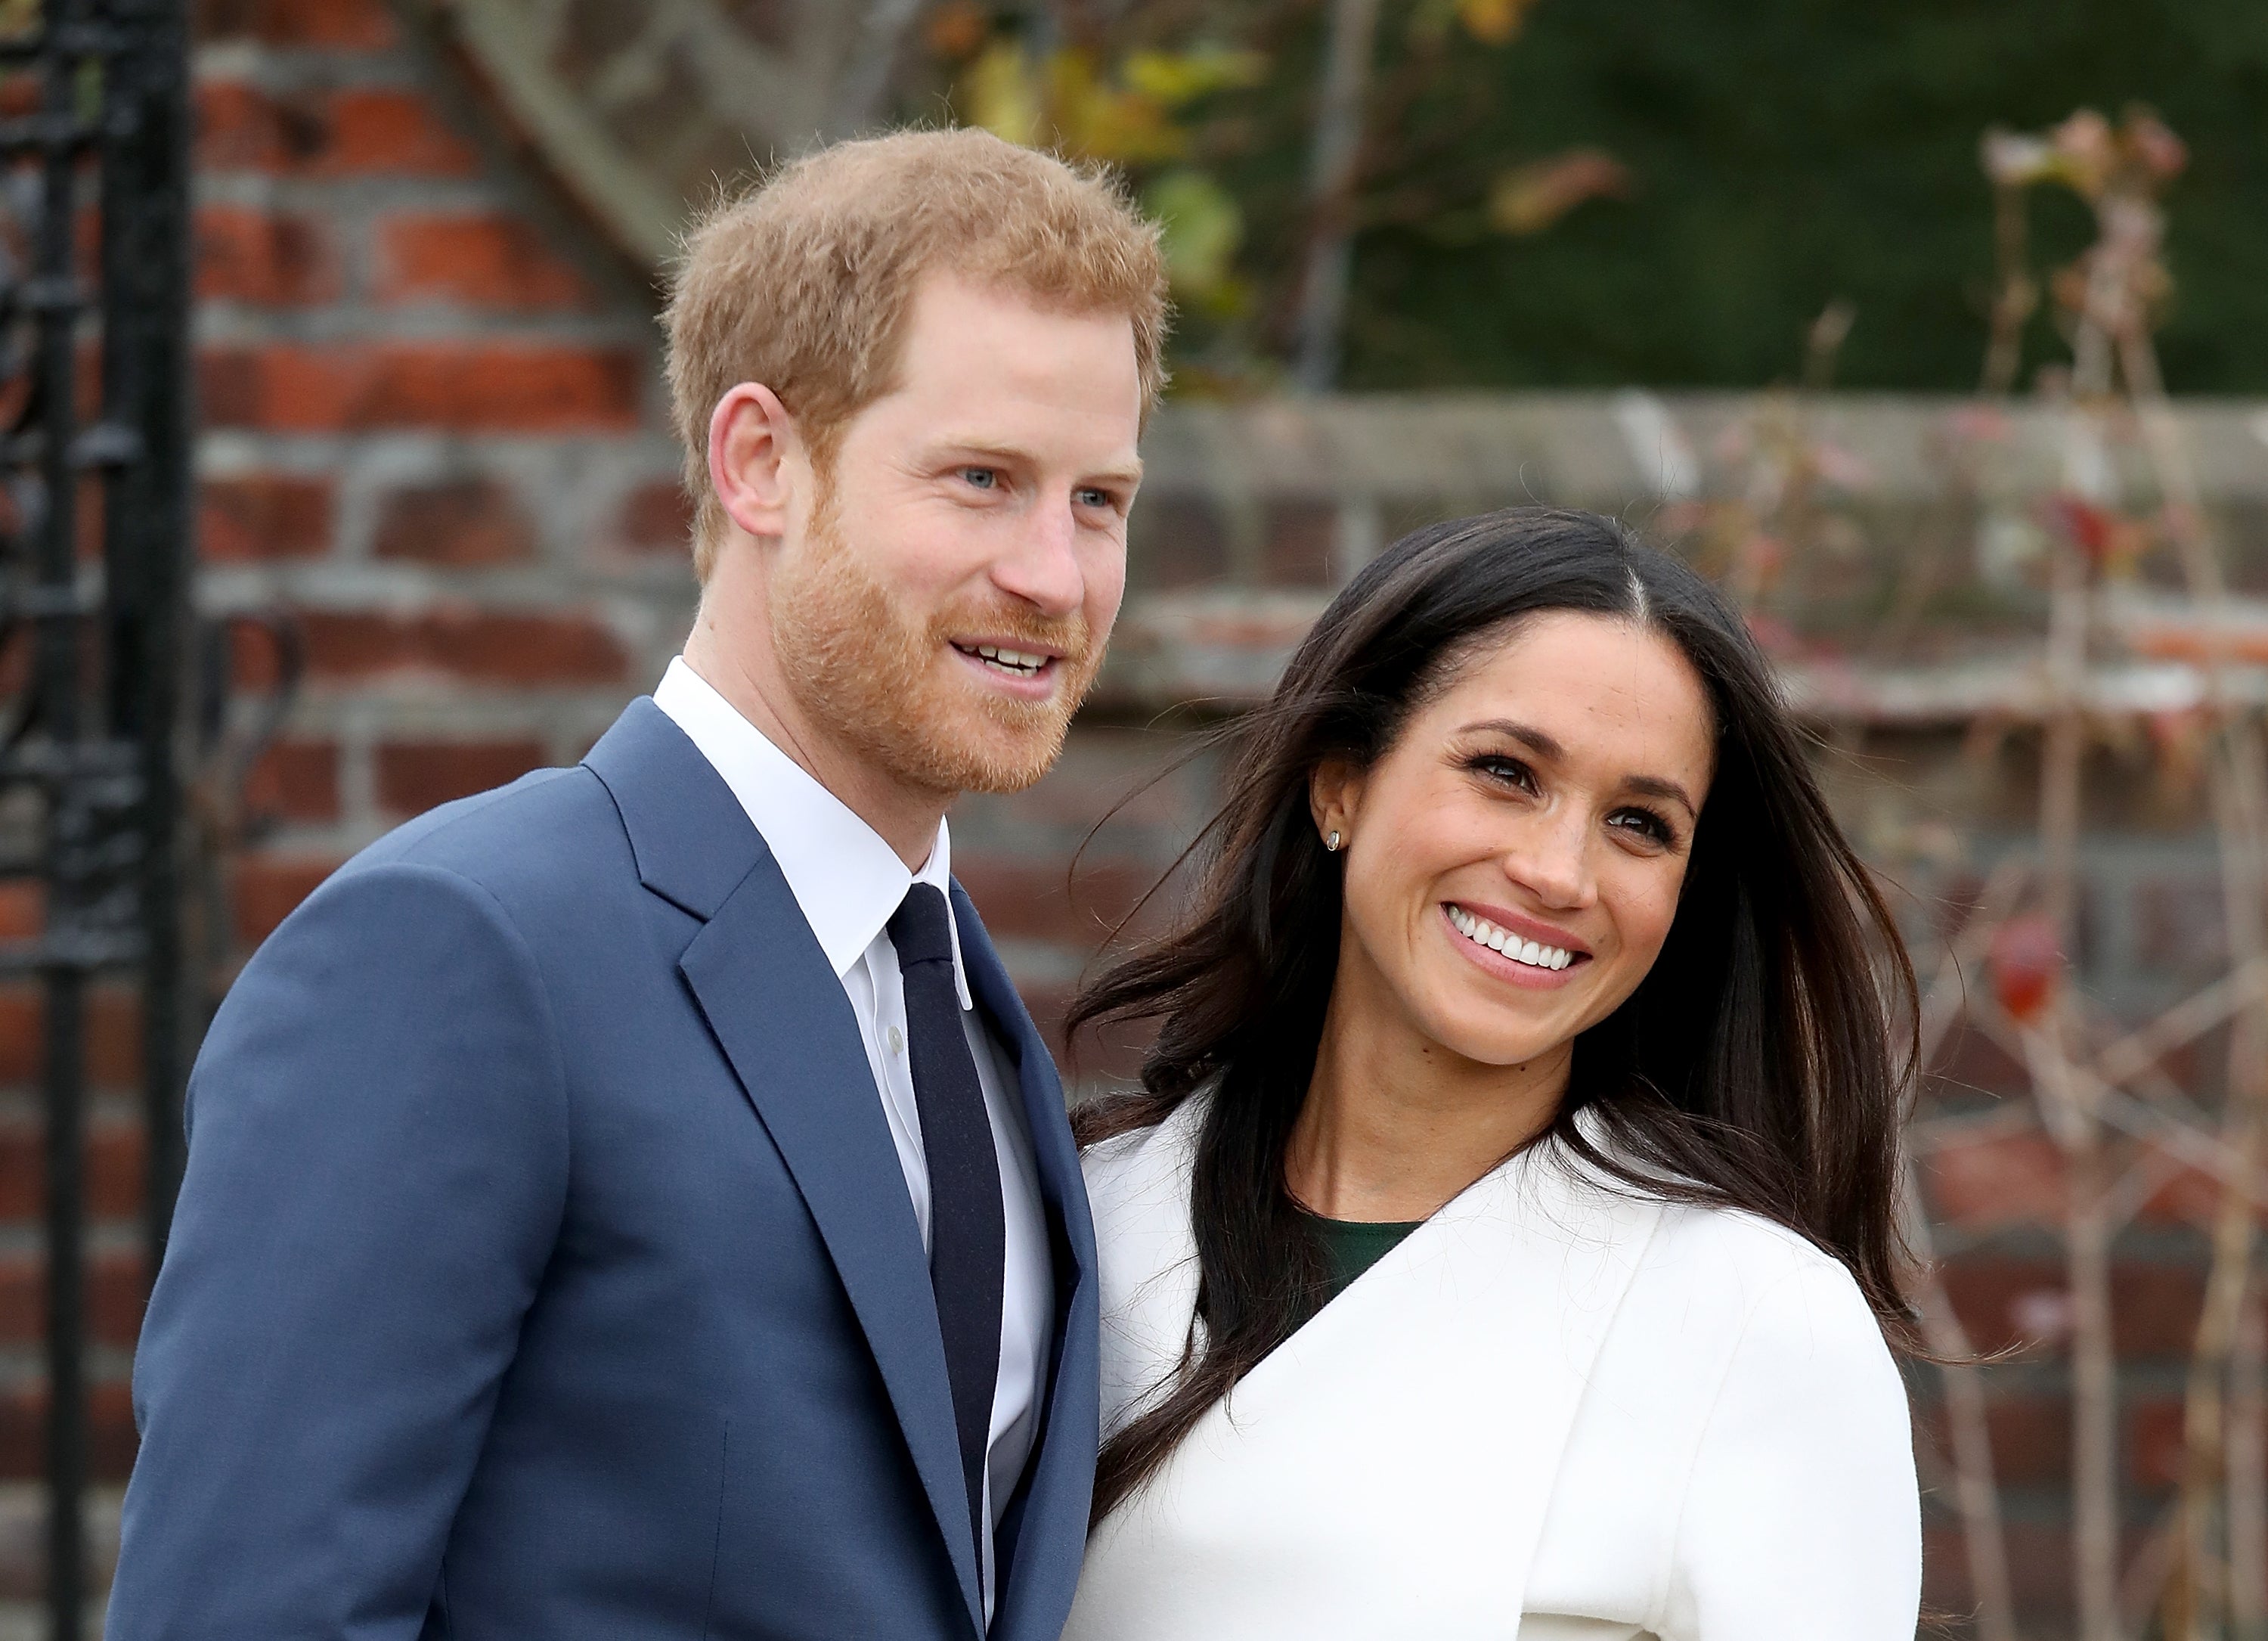 After A Trying Year, Meghan Markle and Prince Harry Will Step Back From Royal Duties